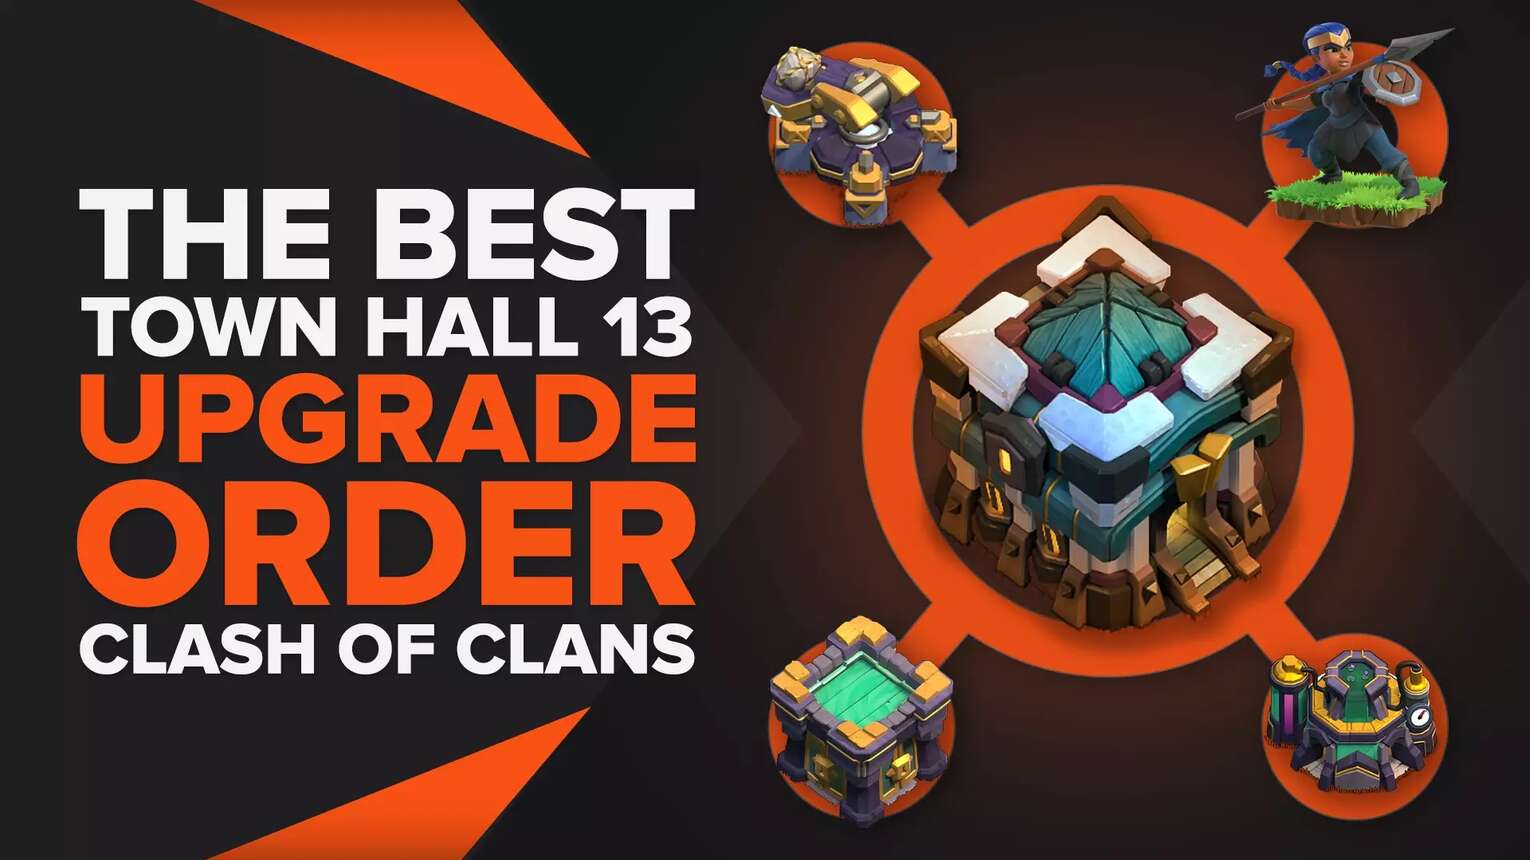 See The Best Town Hall 13 Upgrade Order In Clash Of Clans!